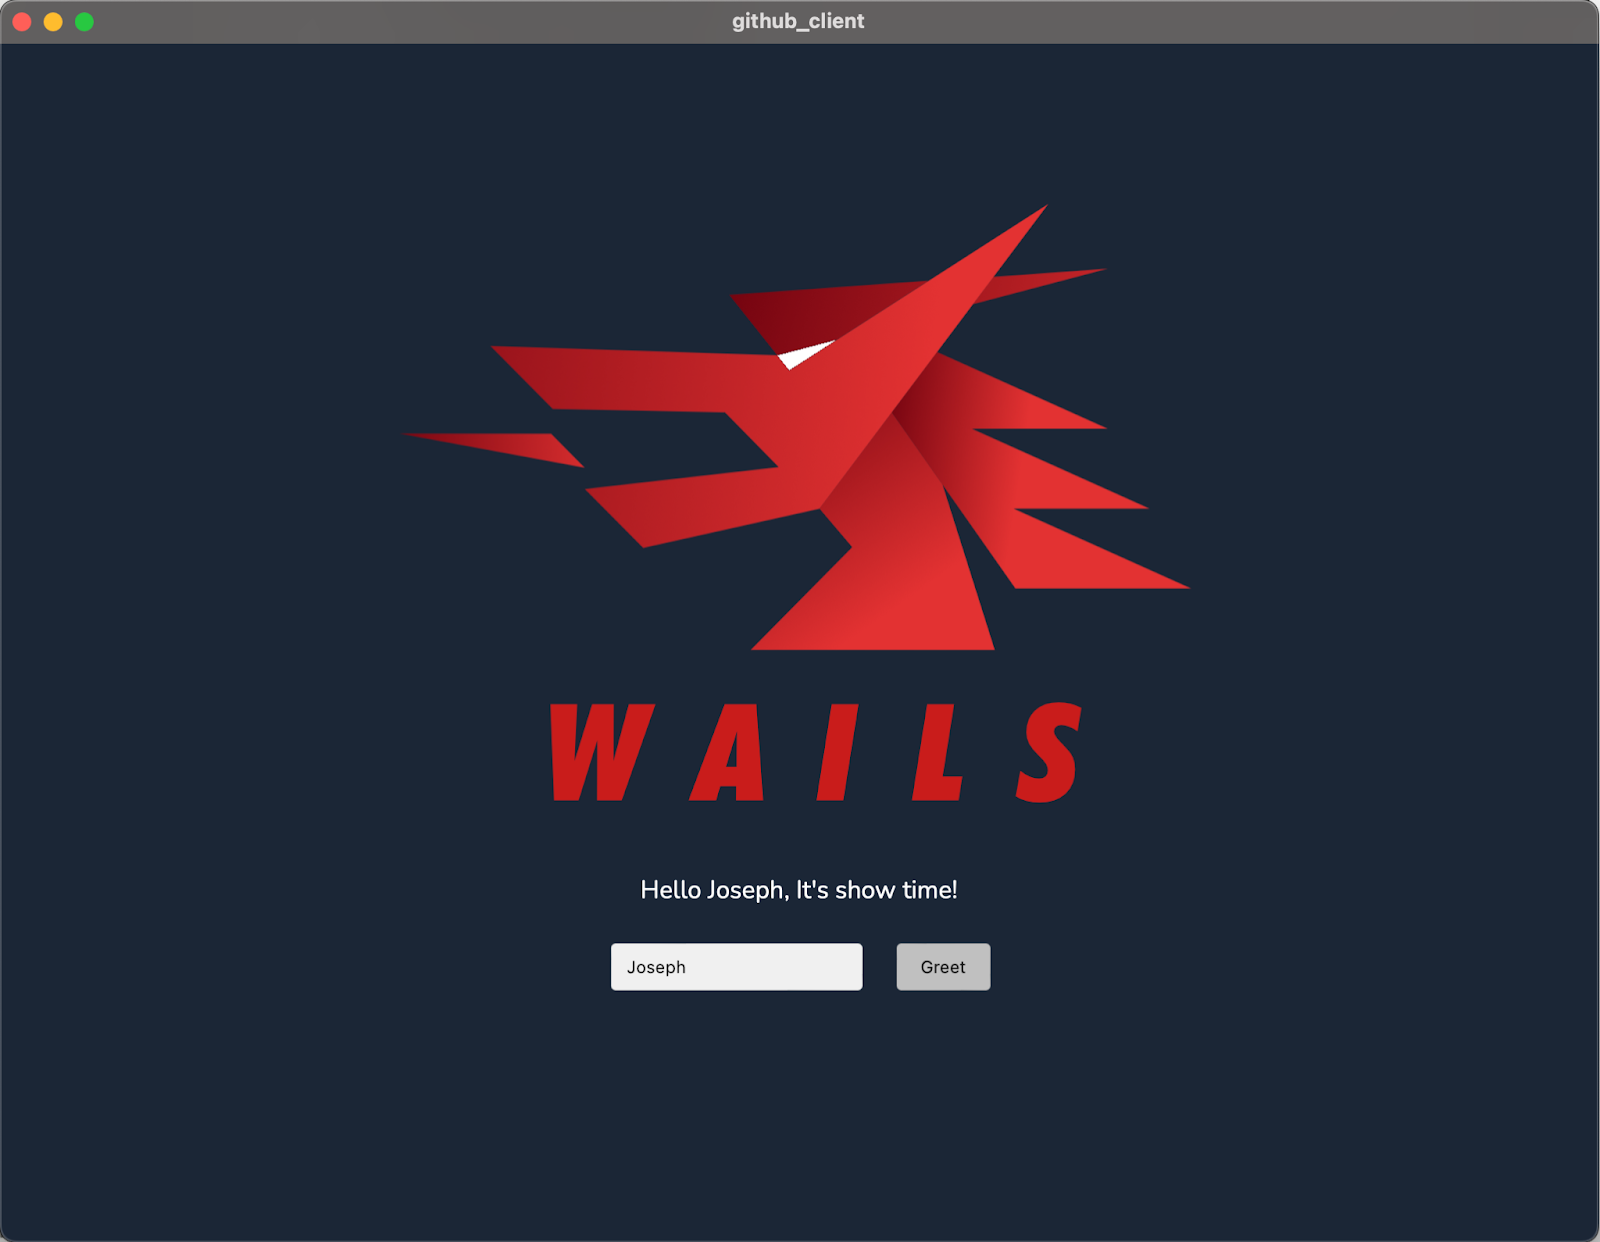 The initial Wails app running on macOS